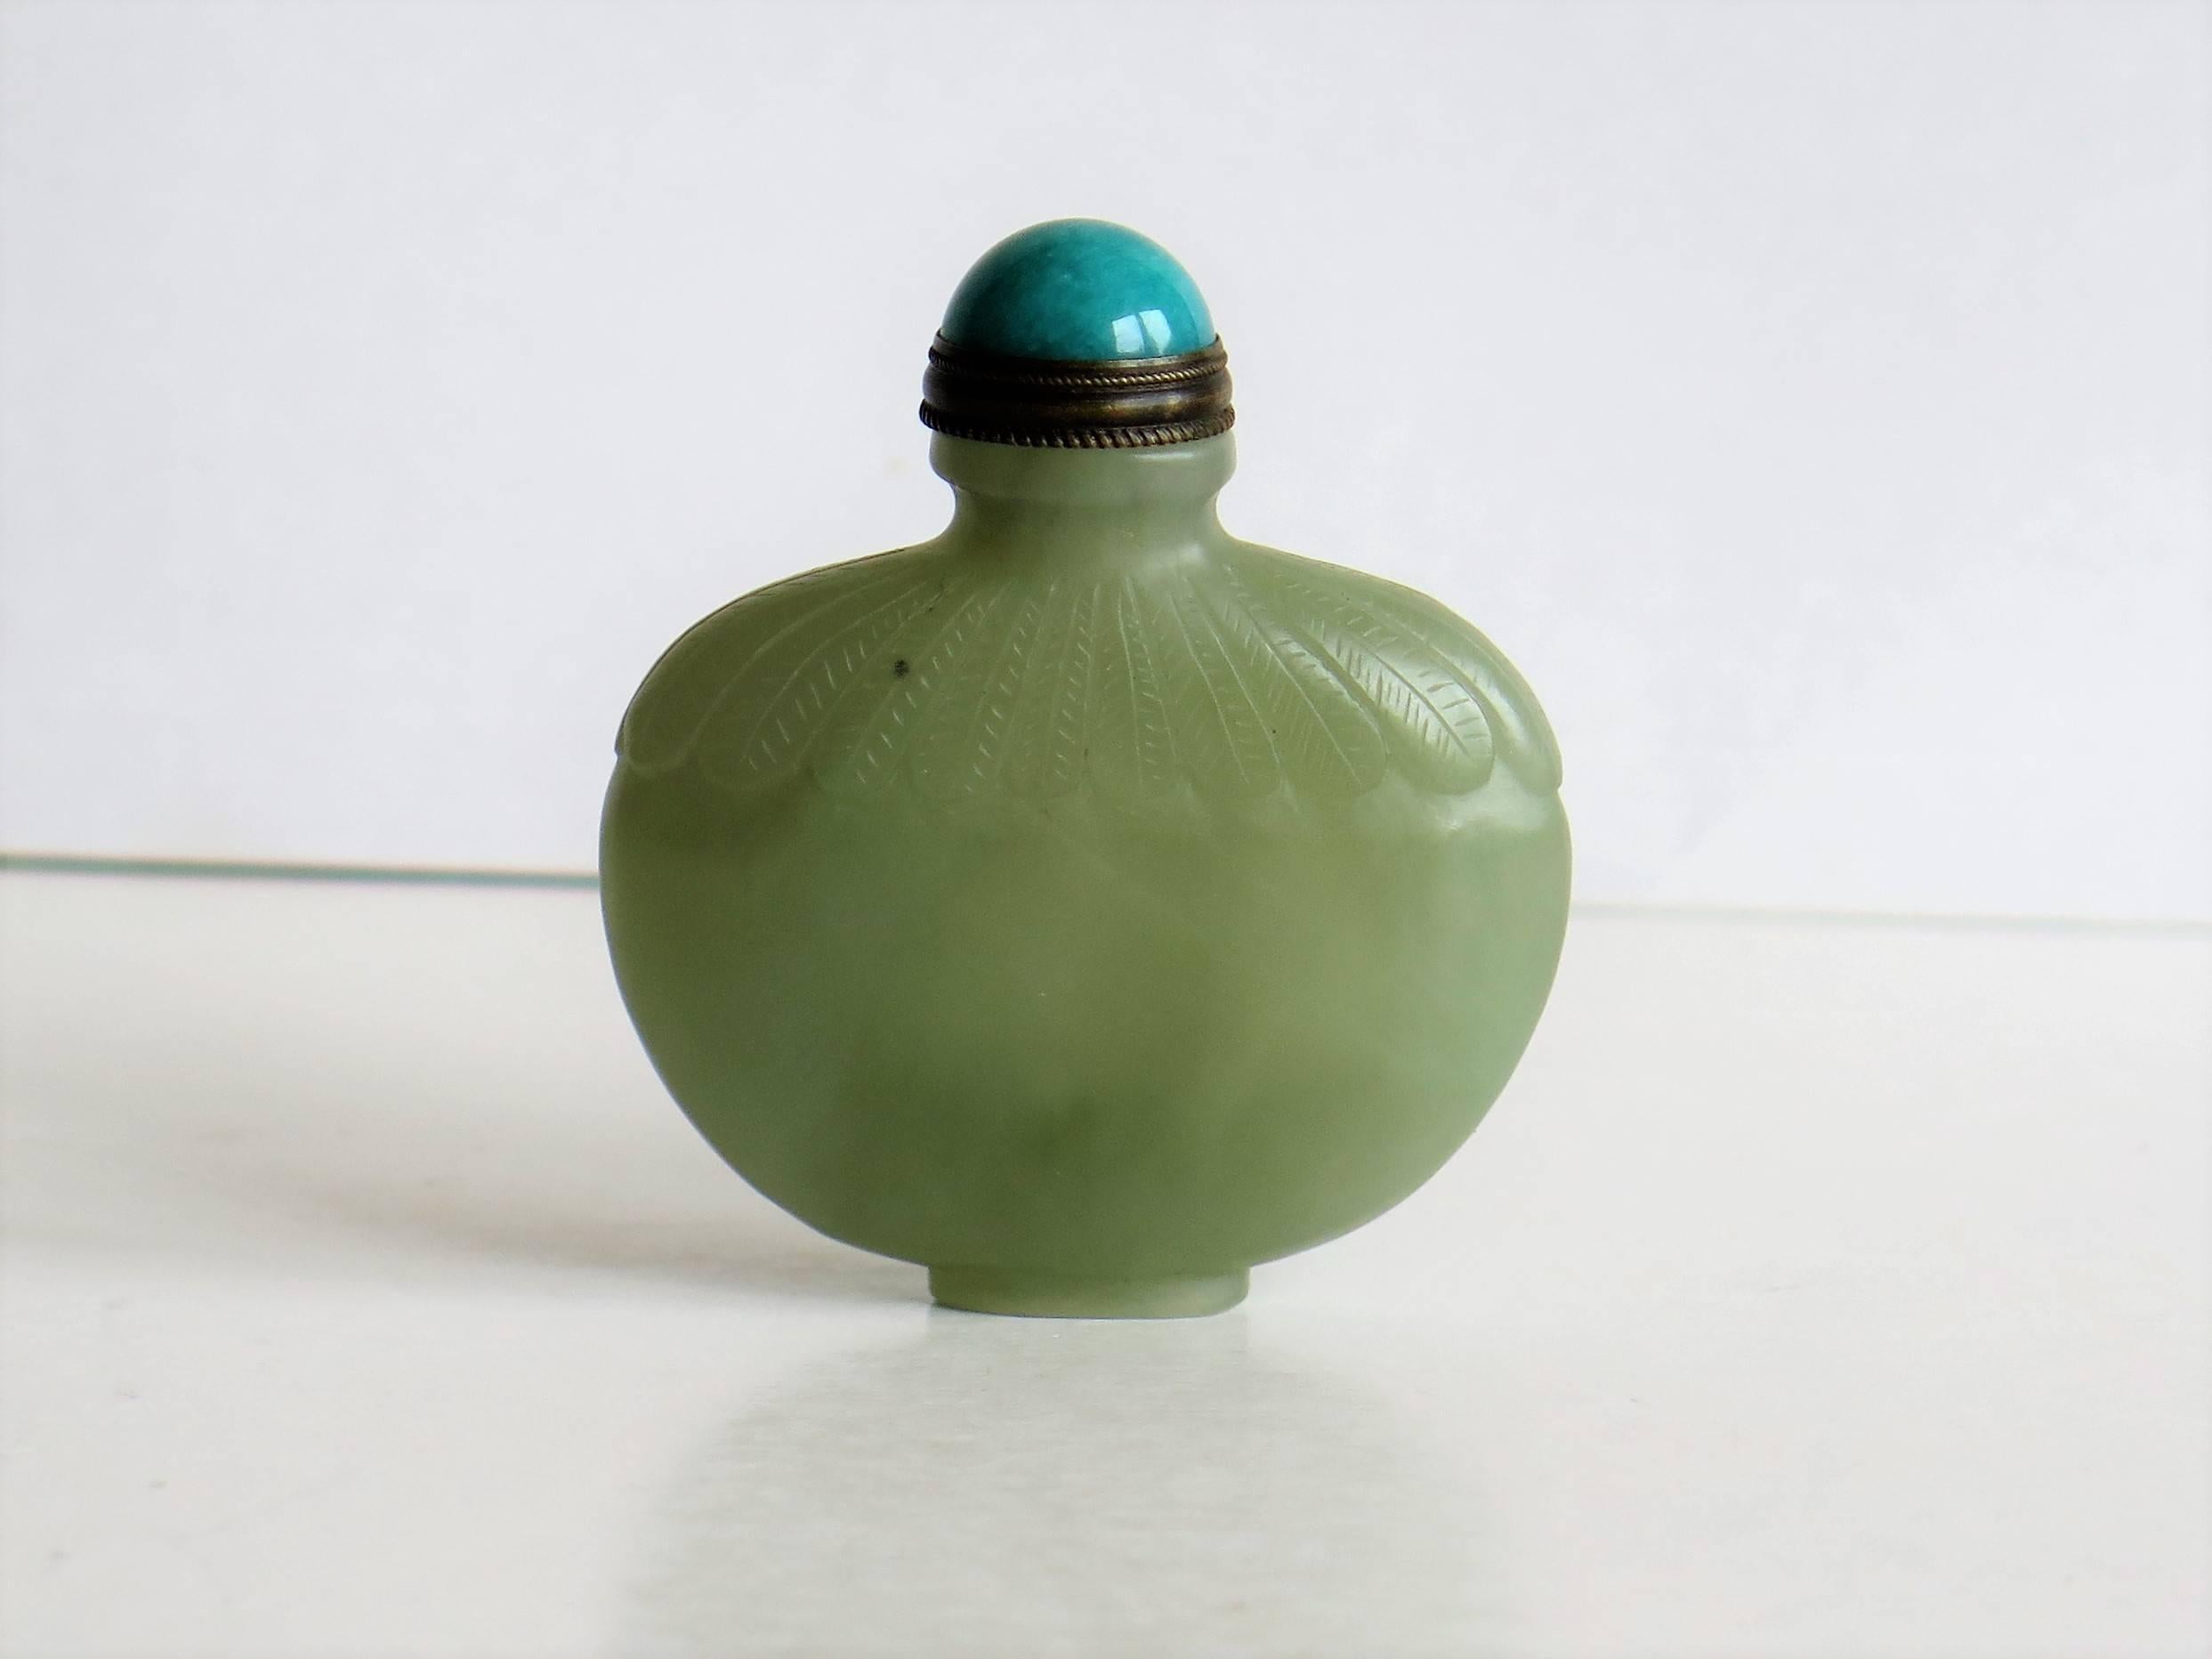 Hand-Carved Fine Chinese Snuff Bottle Hand Carved Celadon Jade with spoon top, Circa 1920